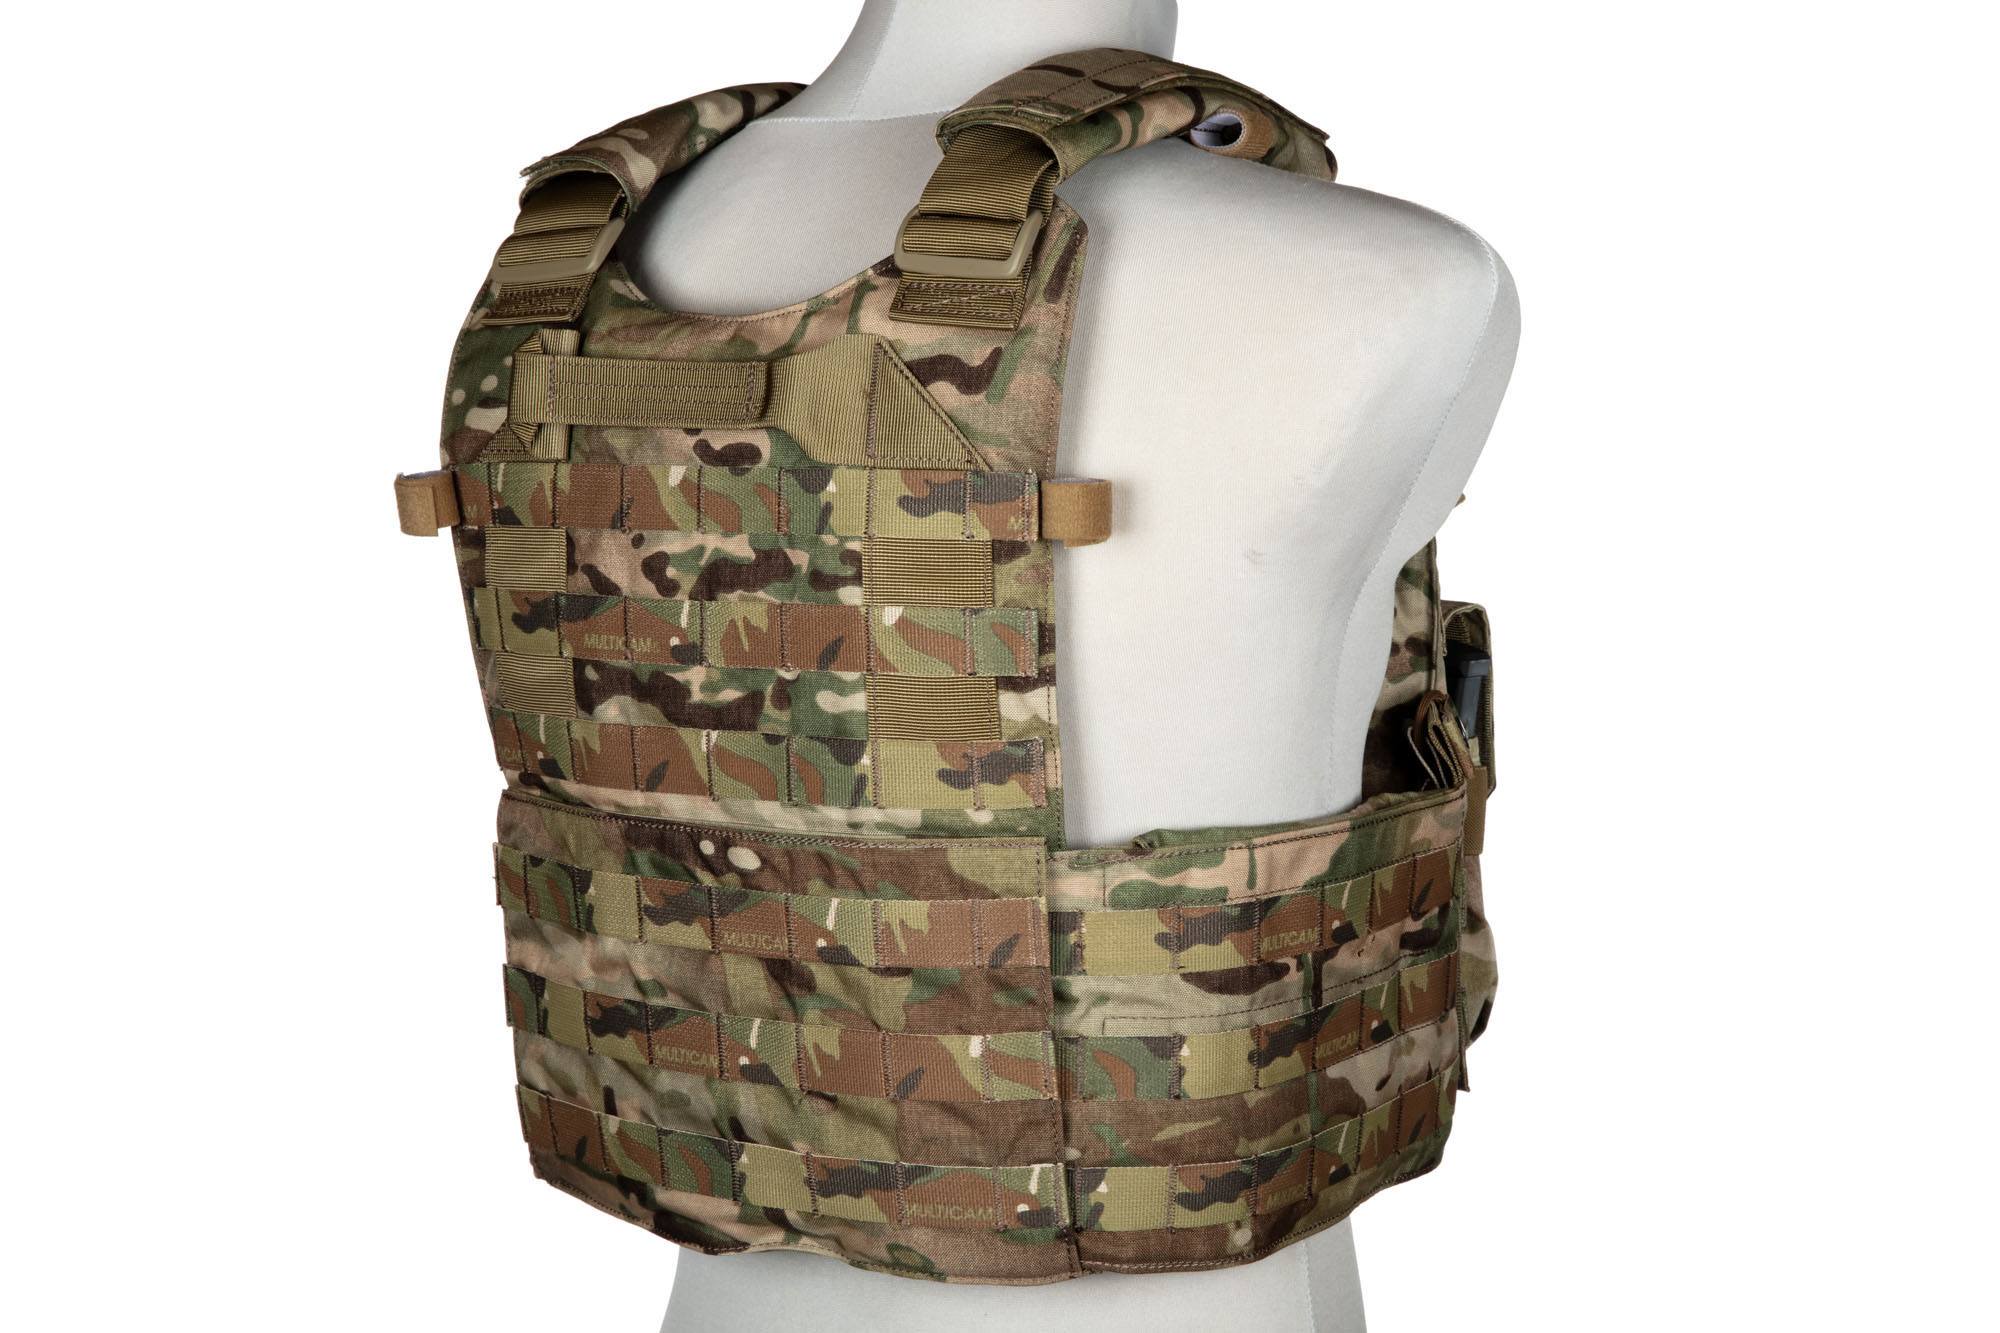 MOLLE mounting system Tactical gear